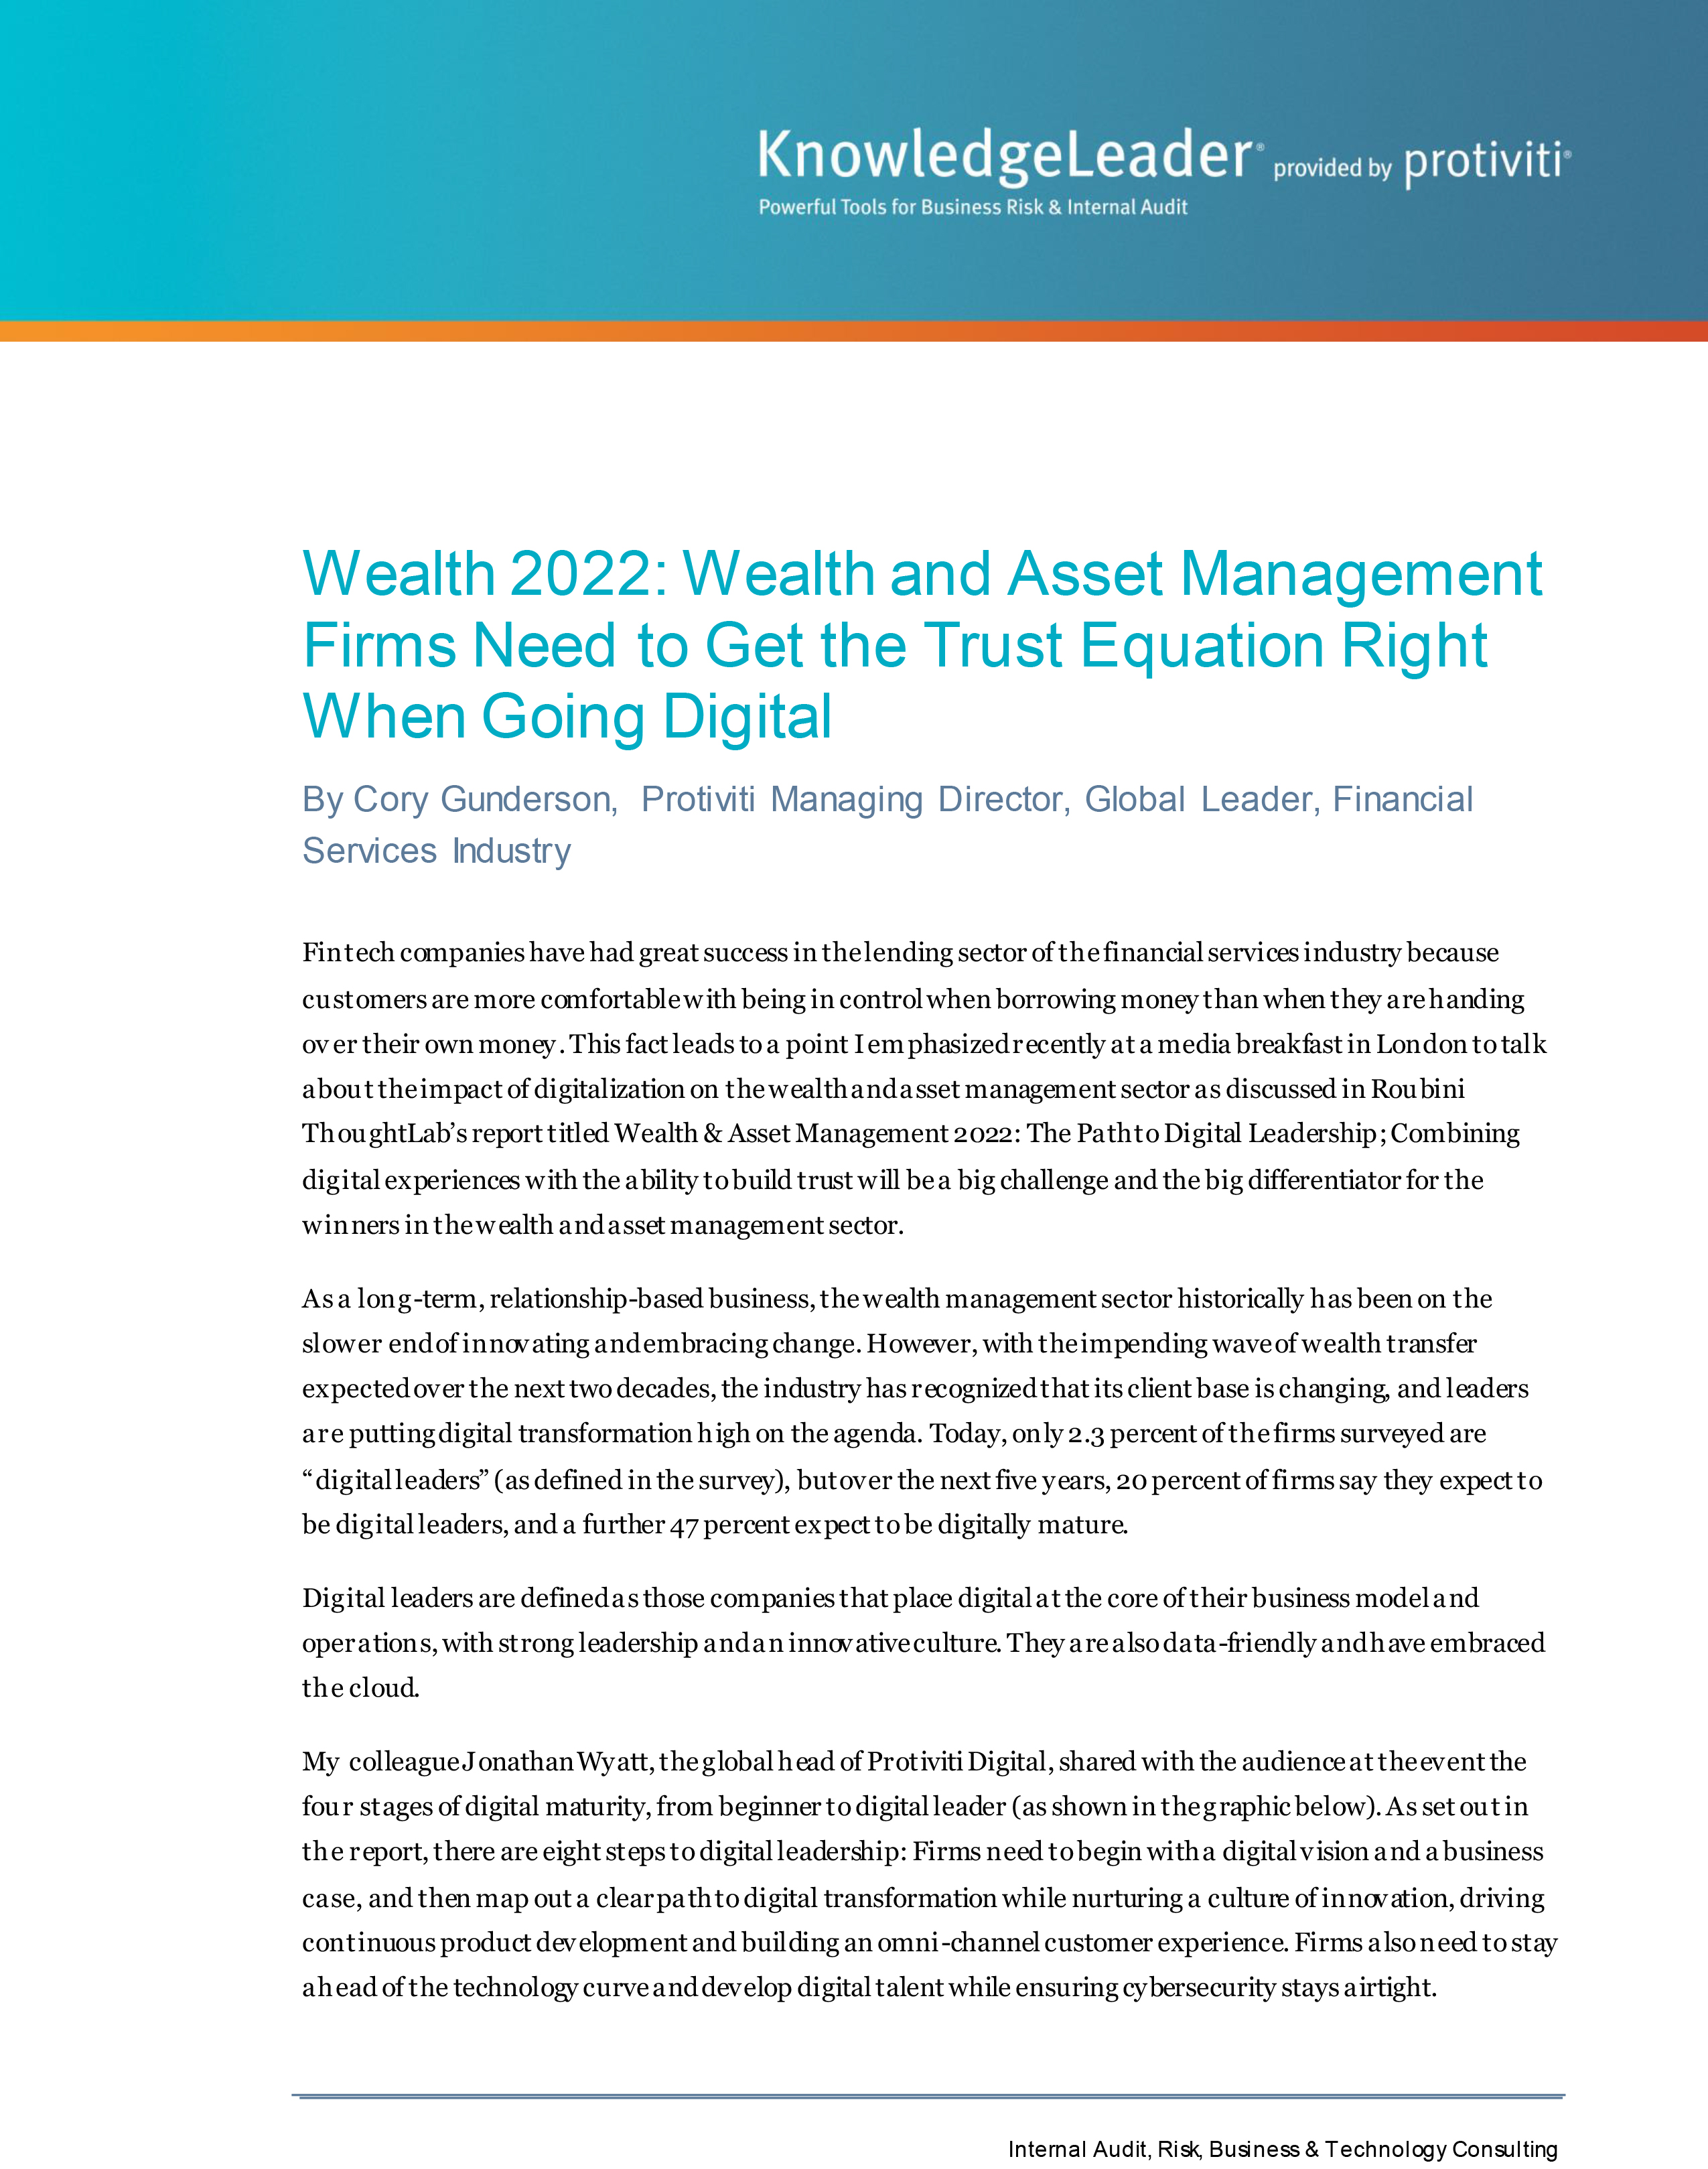 Screenshot of the first page of Wealth 2022: Wealth and Asset Management Firms Need to Get the Trust Equation Right When Going Digital